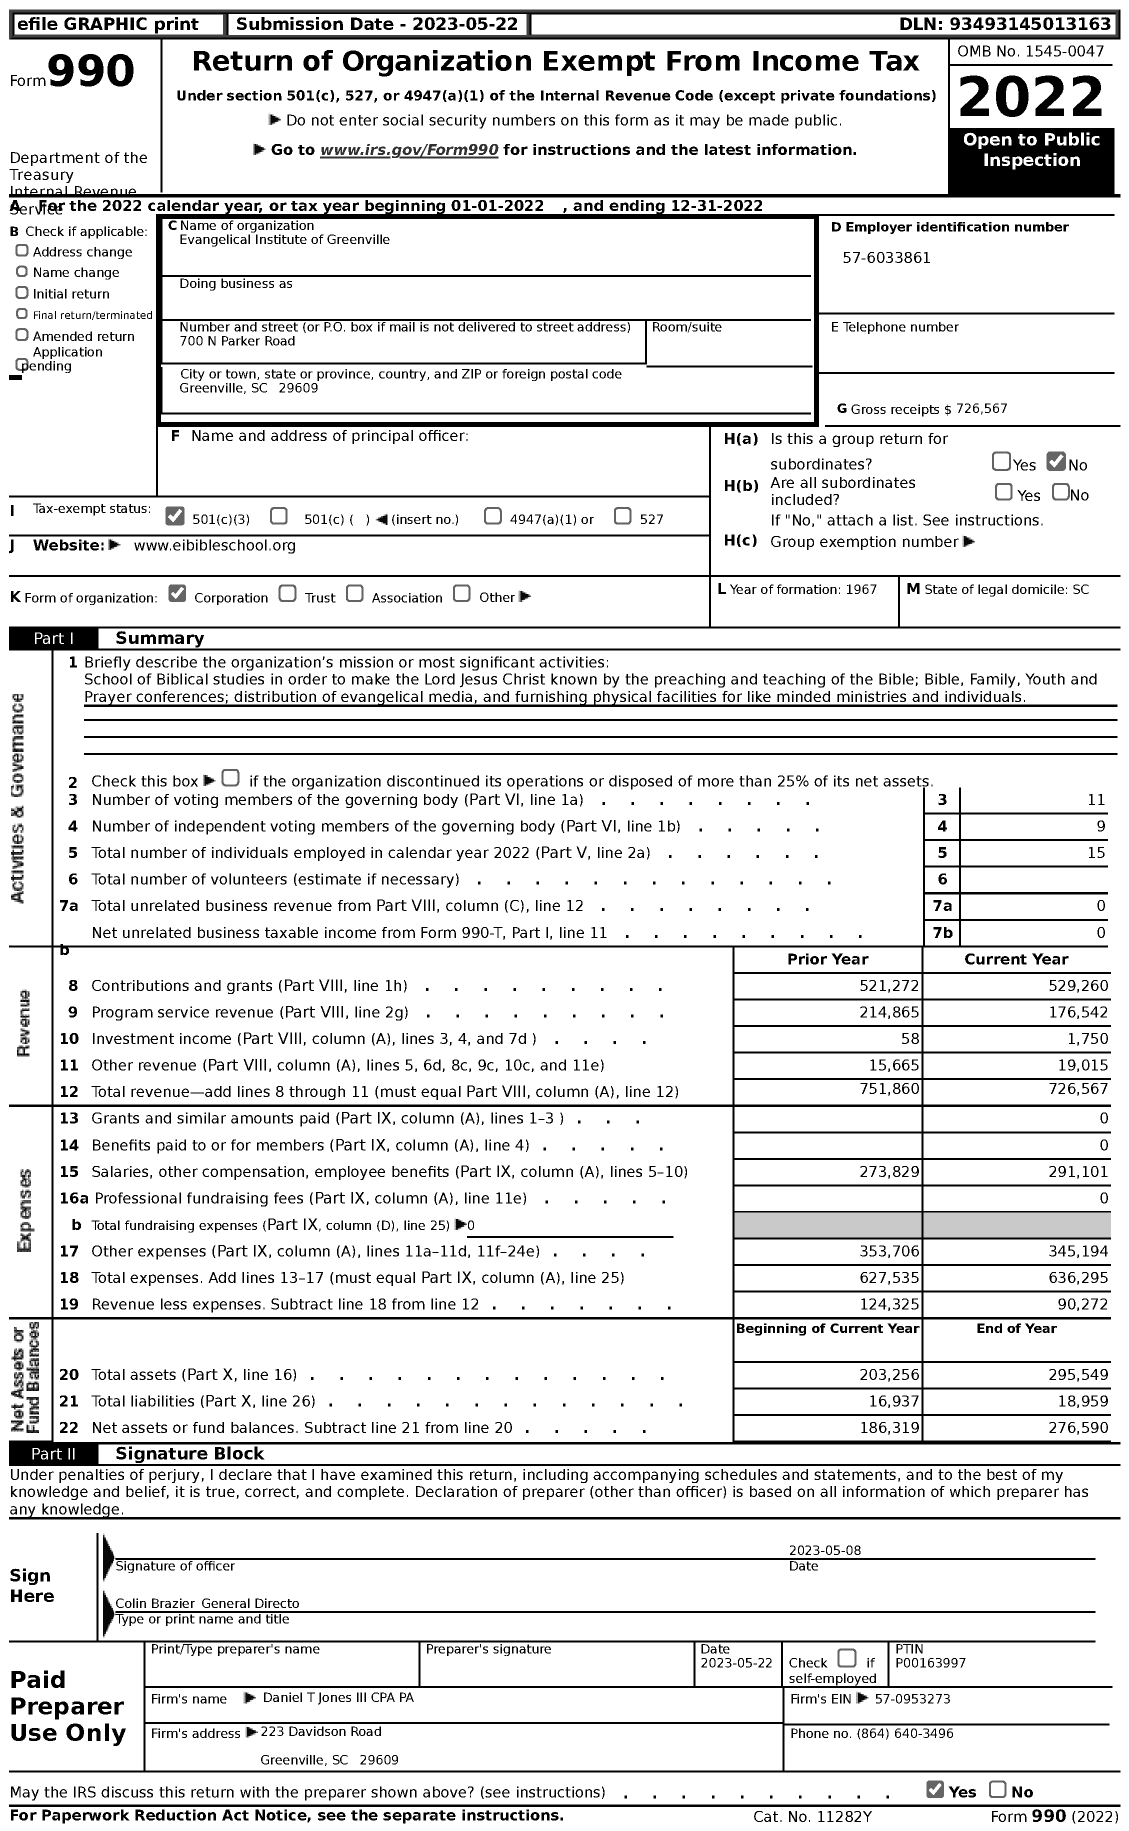 Image of first page of 2022 Form 990 for Evangelical Institute of Greenville